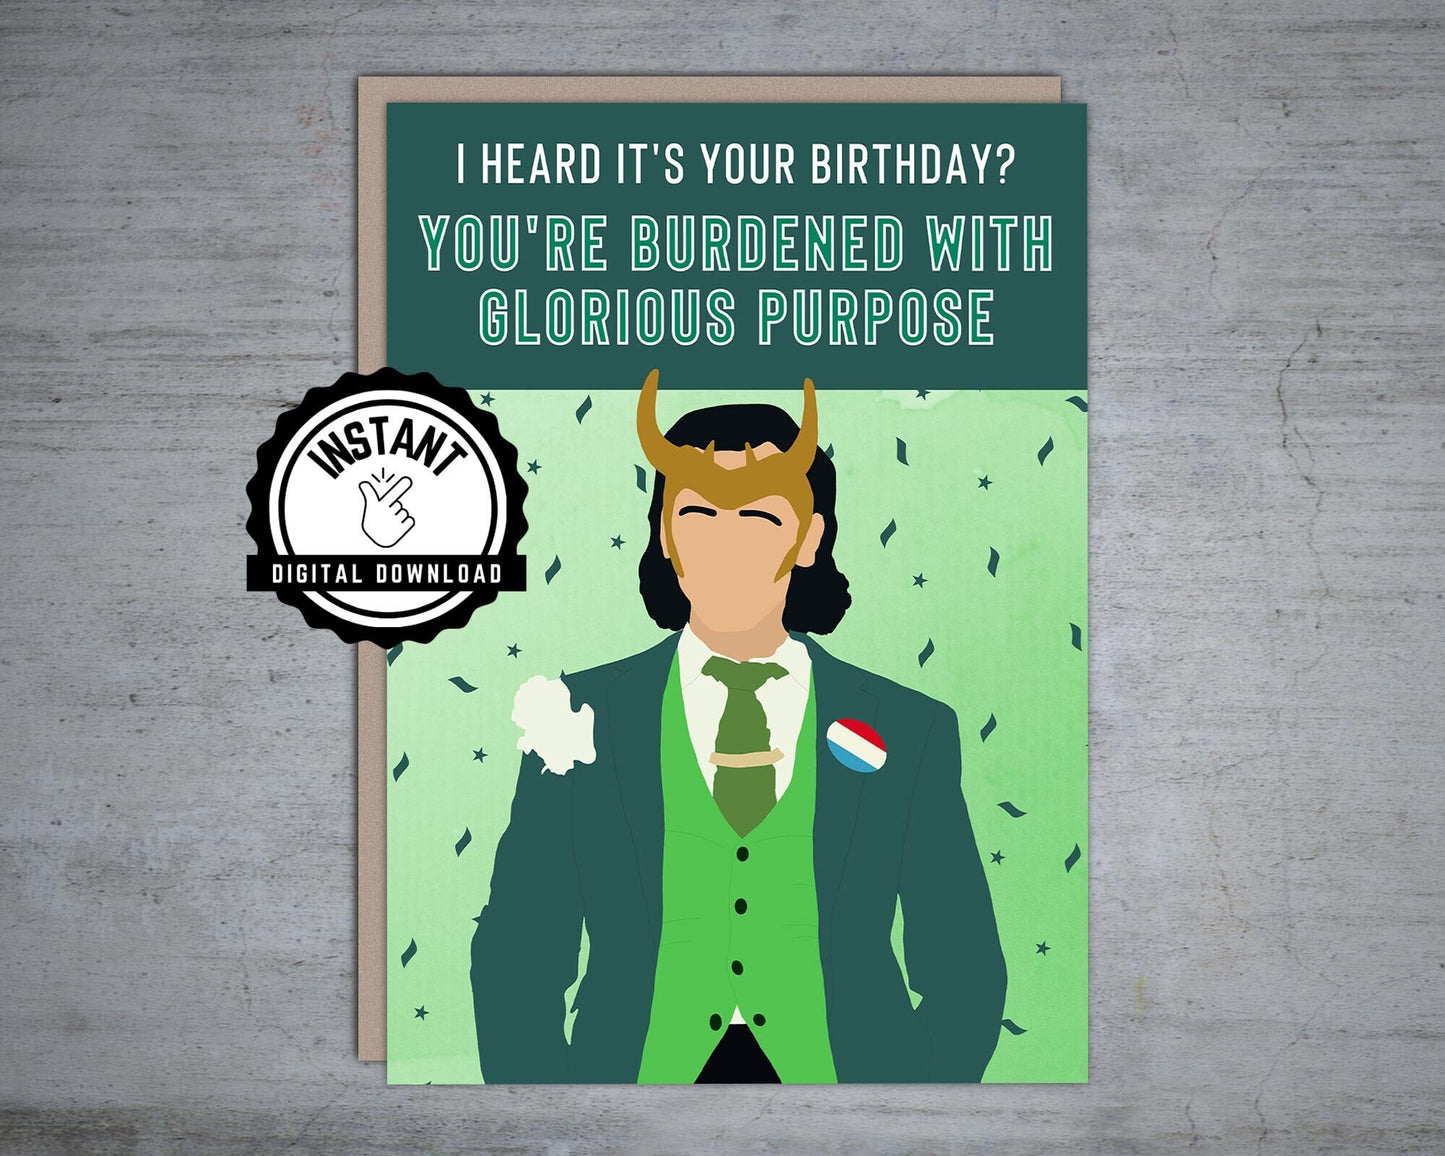 It's Your Birthday You're Burdened With Glorious Purpose | Loki Printable Birthday Card | Foldable 5X7 Instant Digital Download